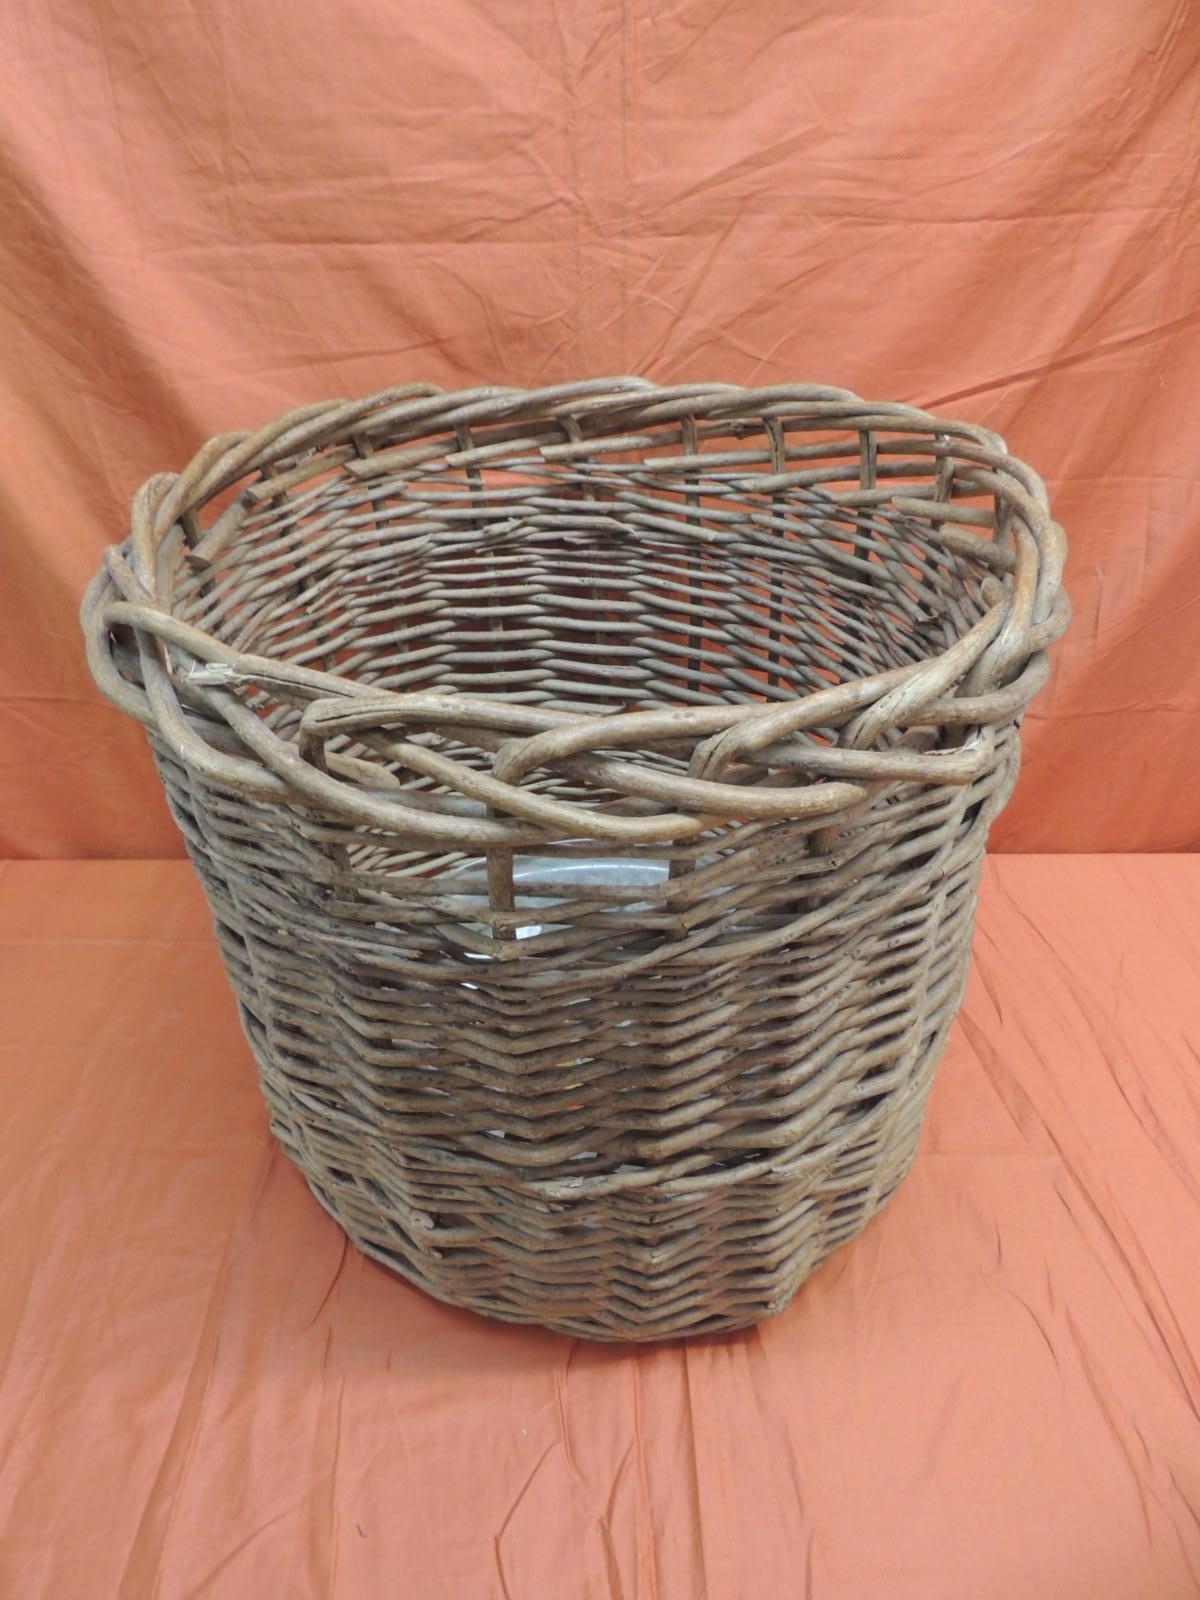 Vintage monumental round willow planter/basket.
Oversized woven basket, idale for large trees or to hold fireplace wood logs.
Includes plastic liner.
Size: 22